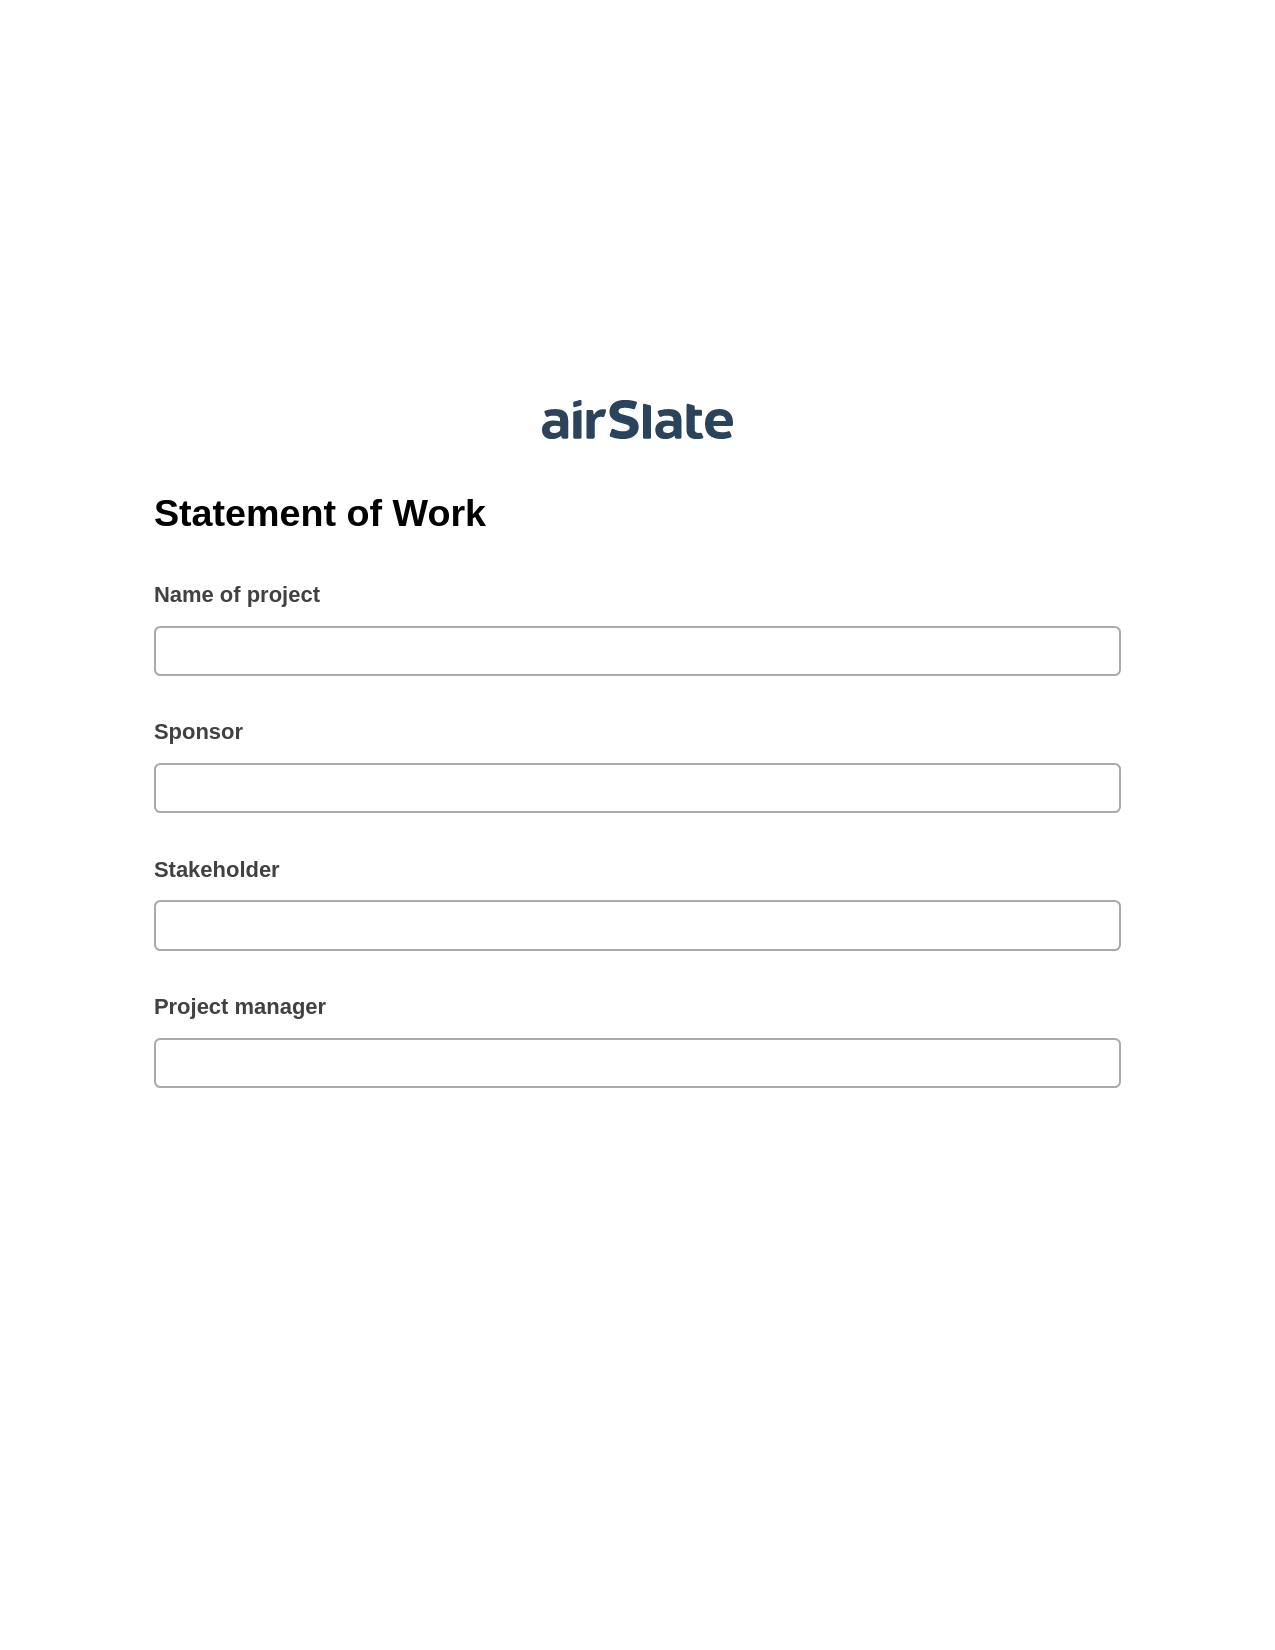 Statement of Work Pre-fill from another Slate Bot, Revoke Access Bot, Export to Excel 365 Bot